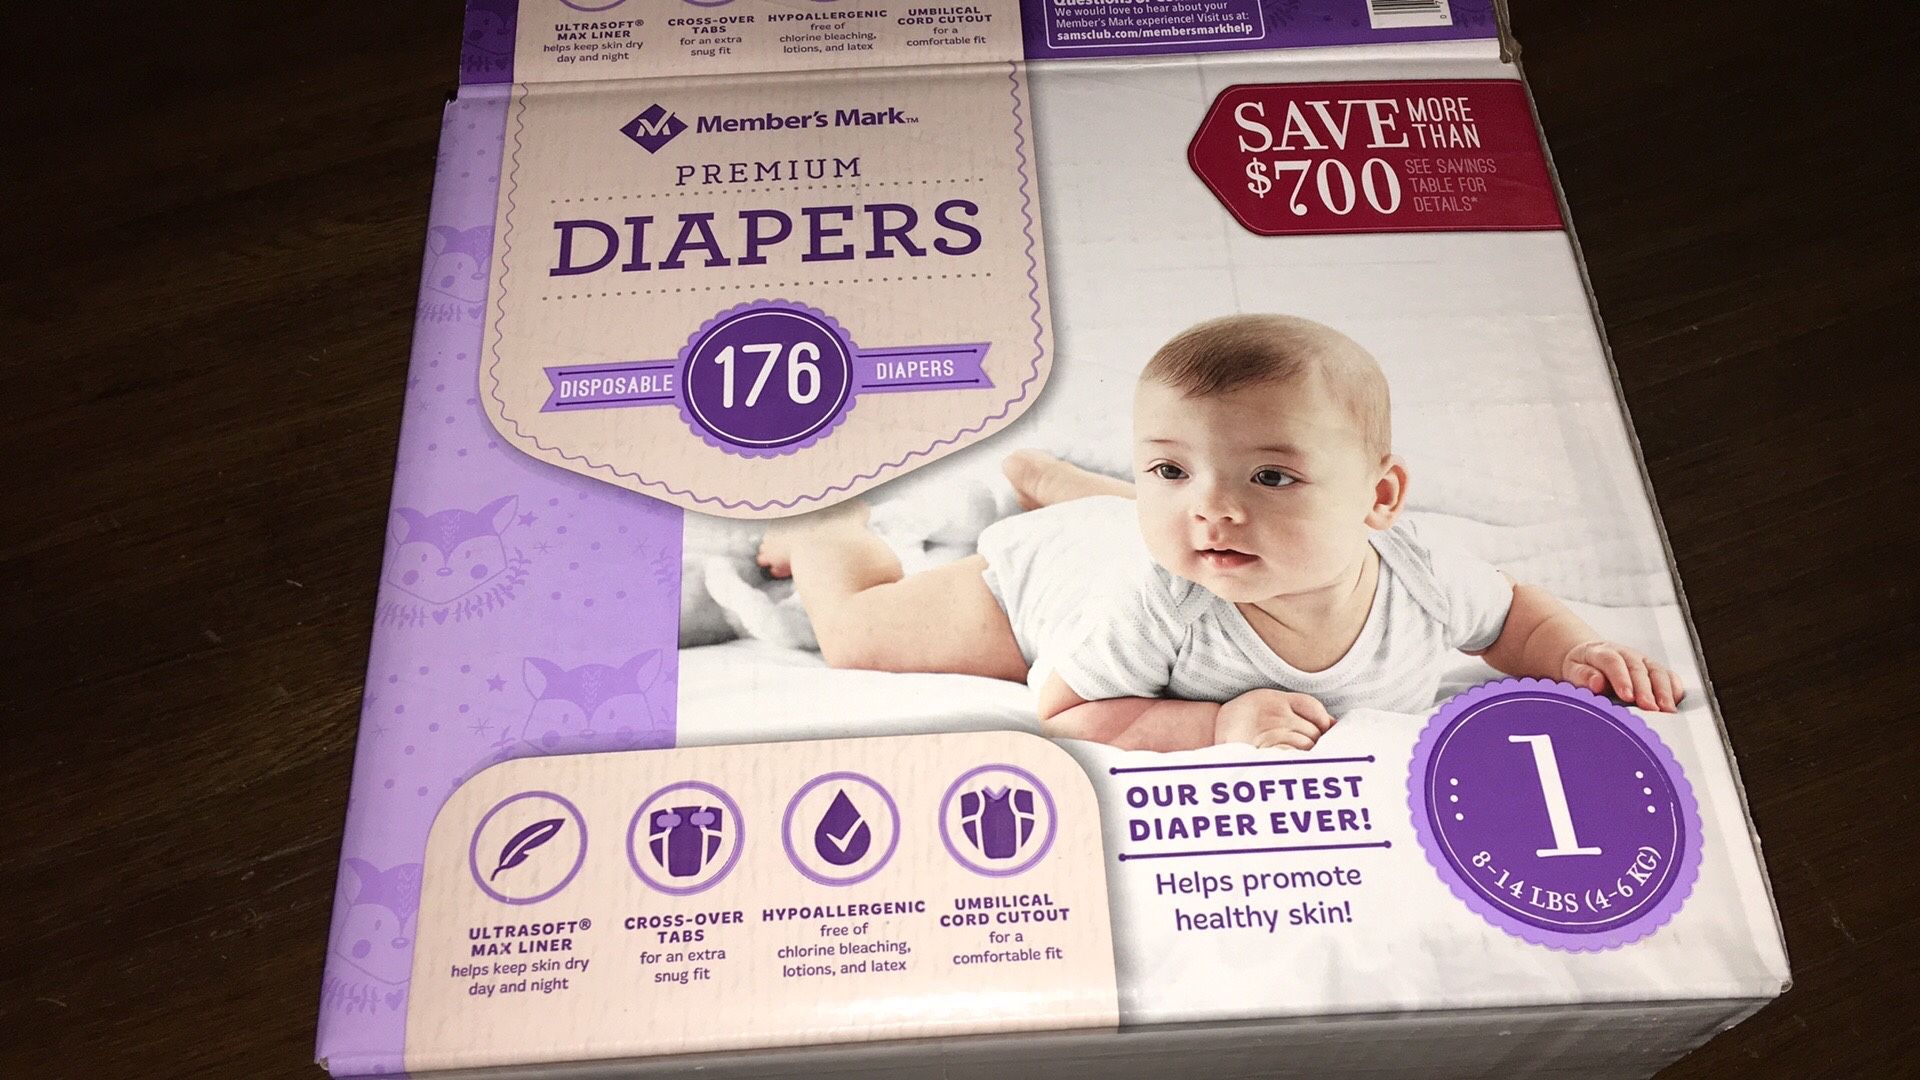 Pamper and members mark 1 month old diapers